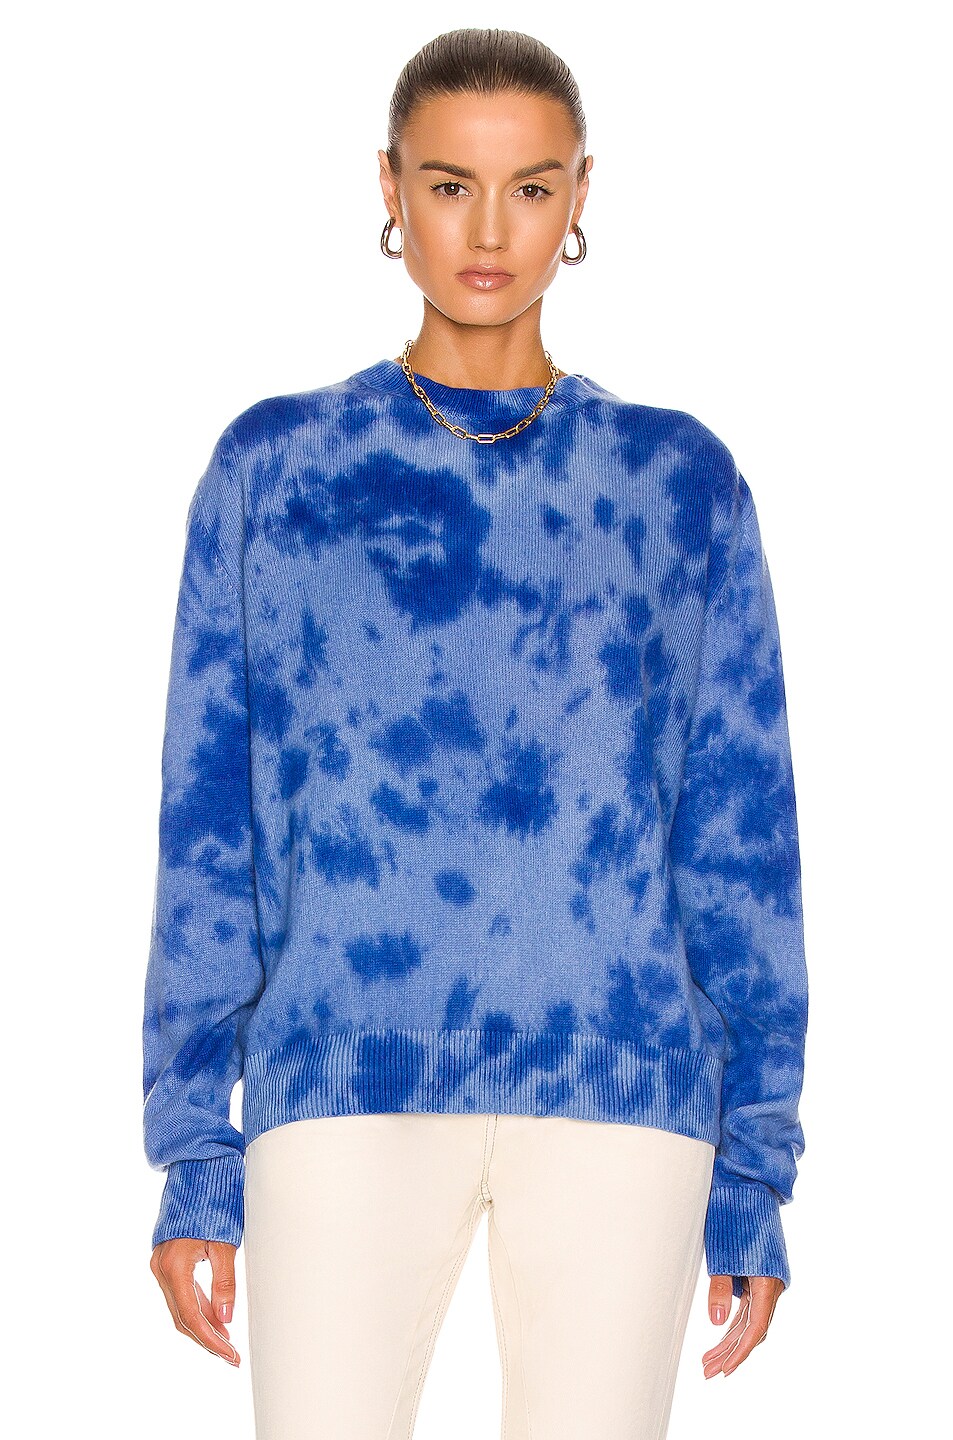 Image 1 of The Elder Statesman Glacier Tranquility Crew Neck Sweater in White, Blue Ice & Cerulean